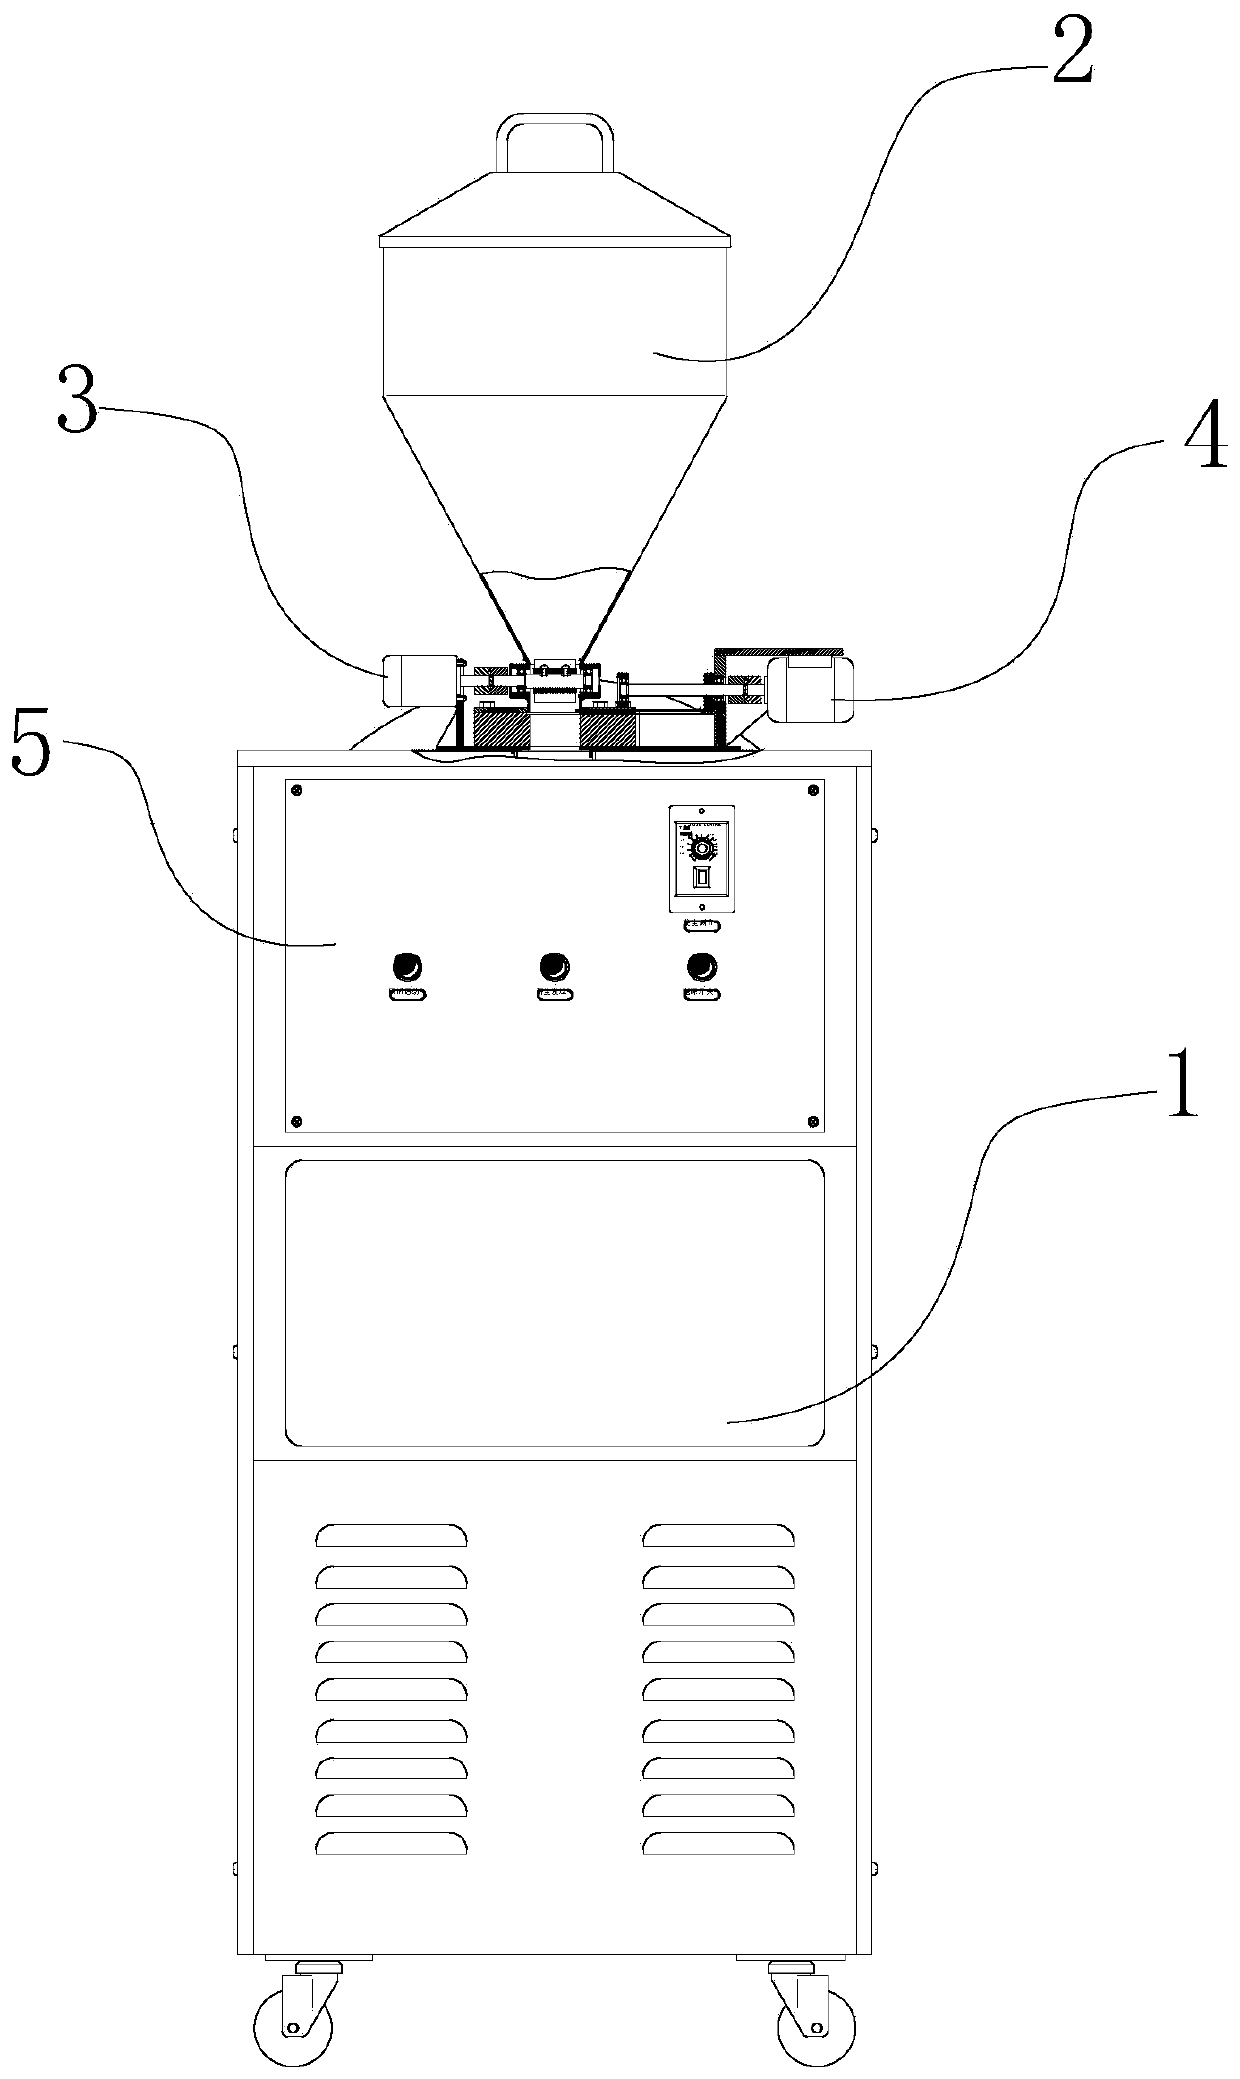 Full-automatic dust generating device